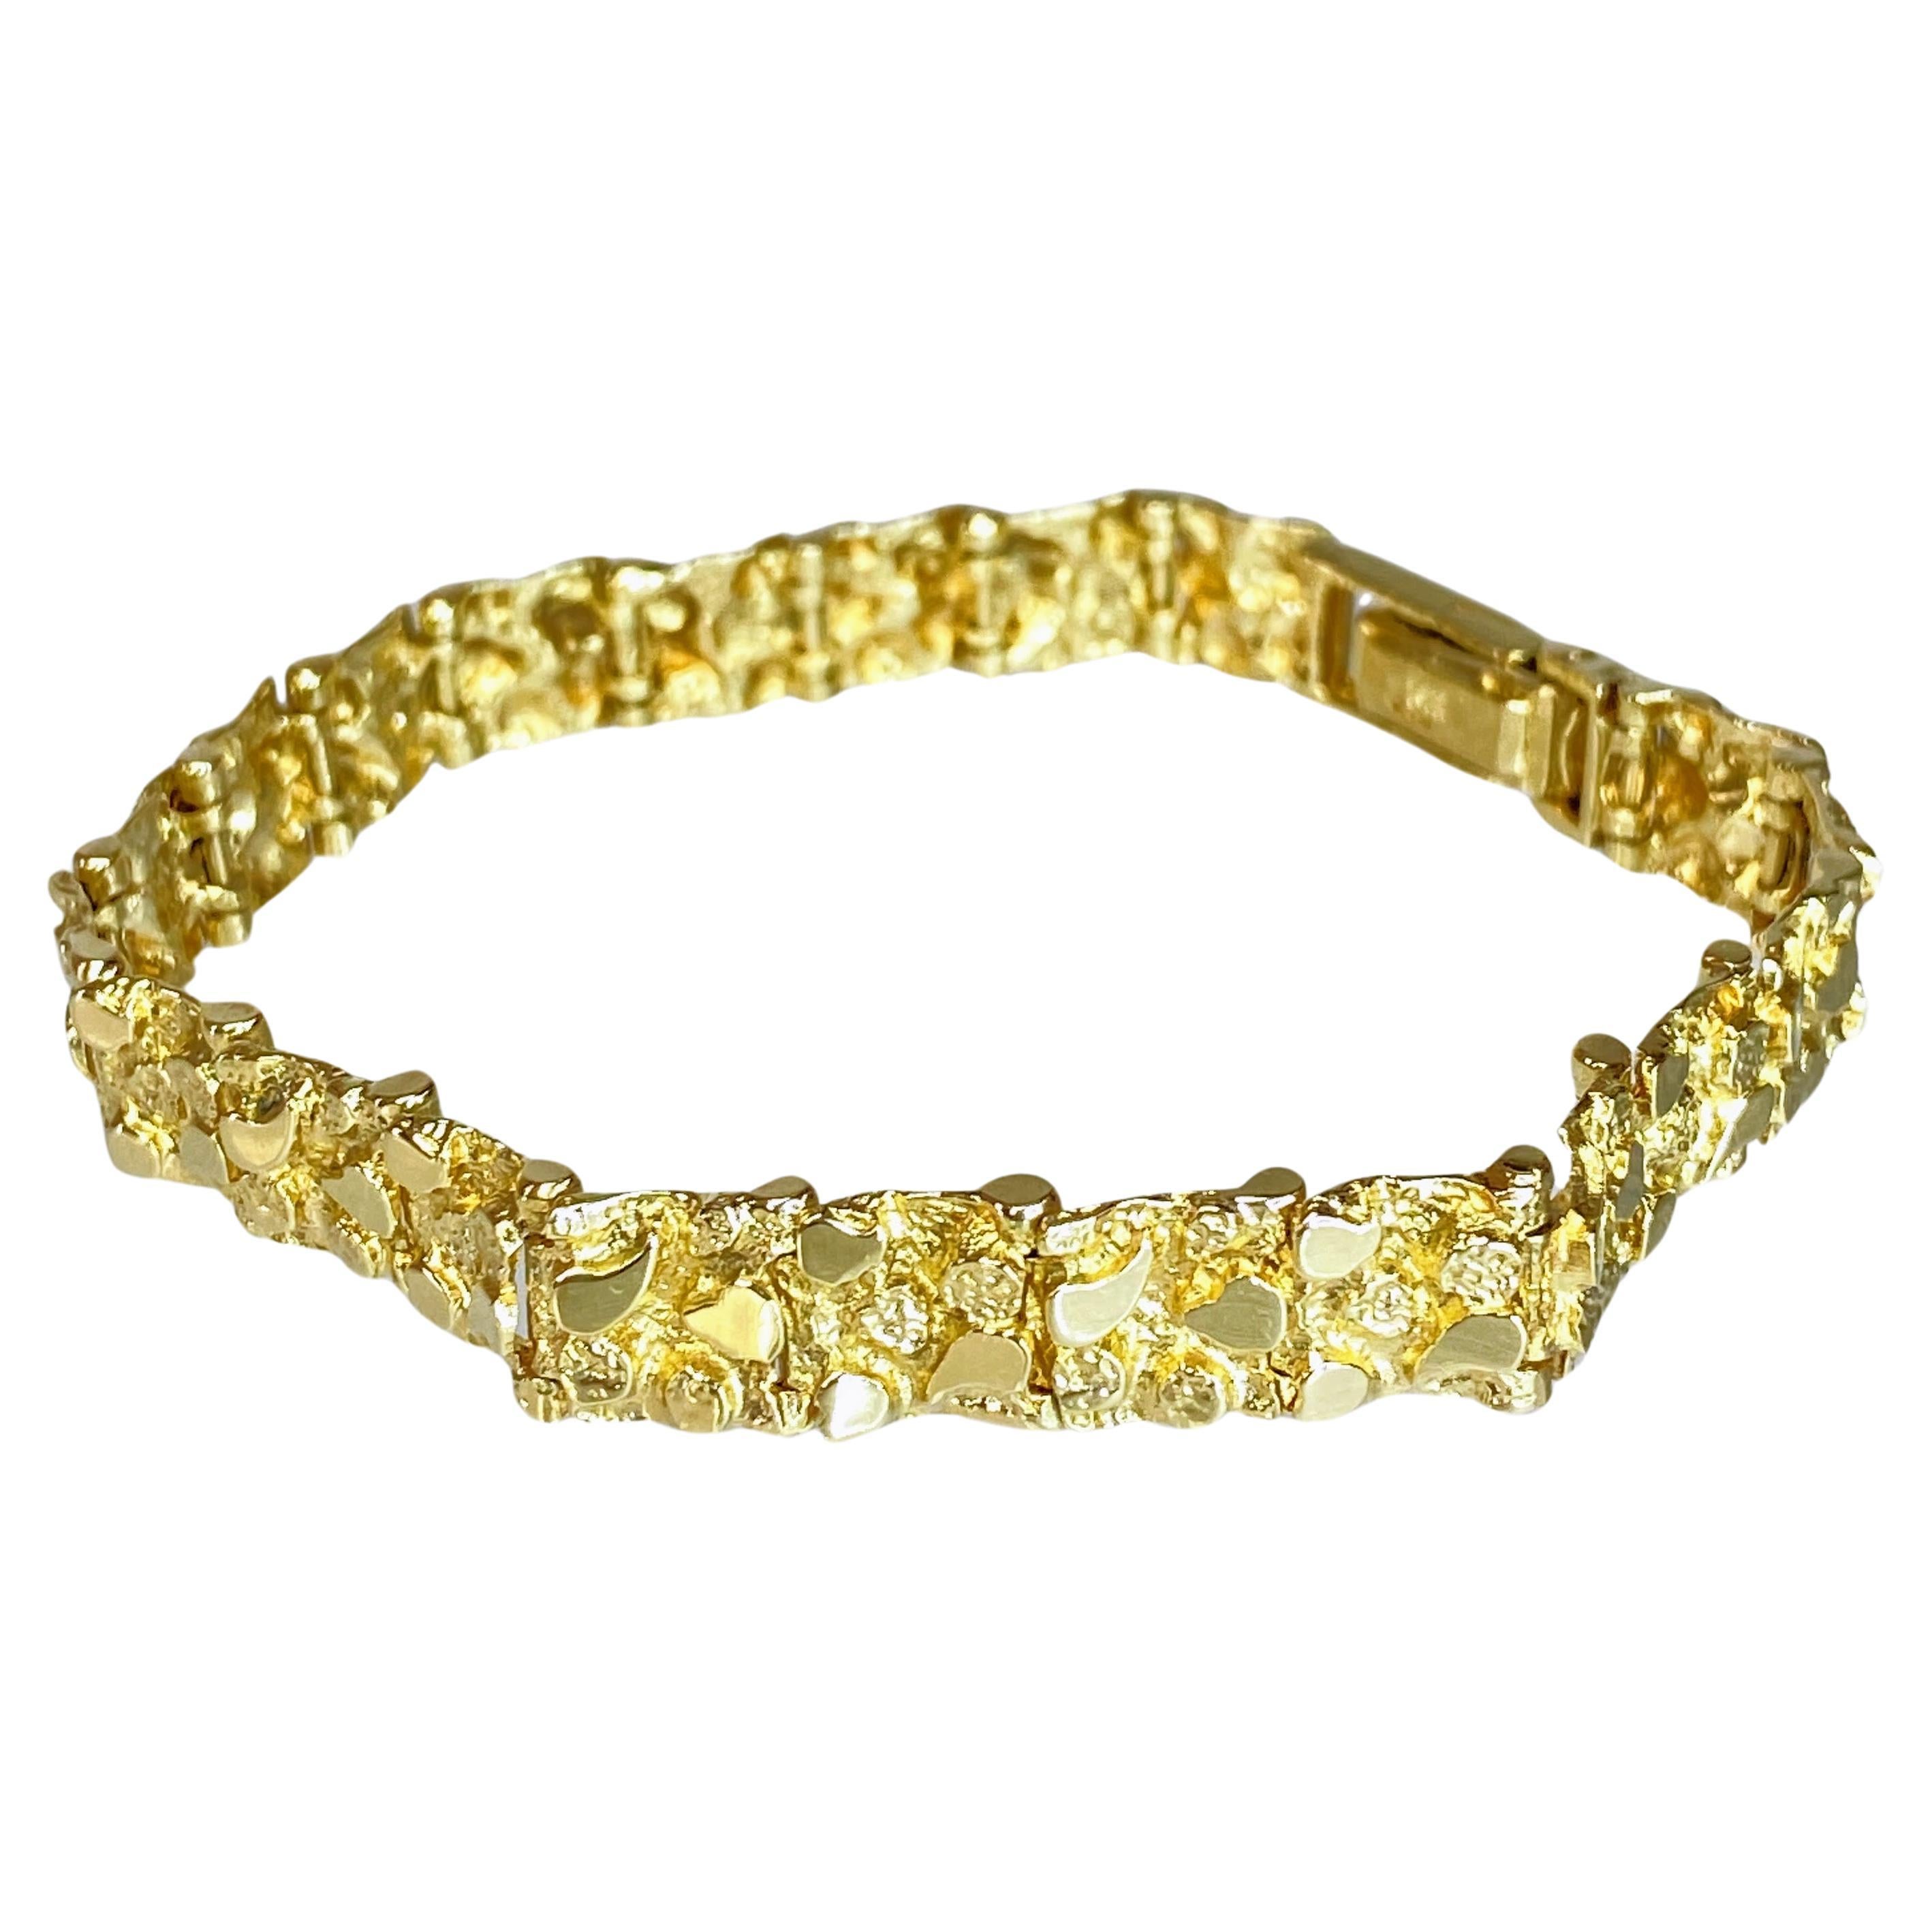 14K Yellow Gold Luxurious 8mm Wide Nugget Style 7" Womens Bracelet 13.9g For Sale